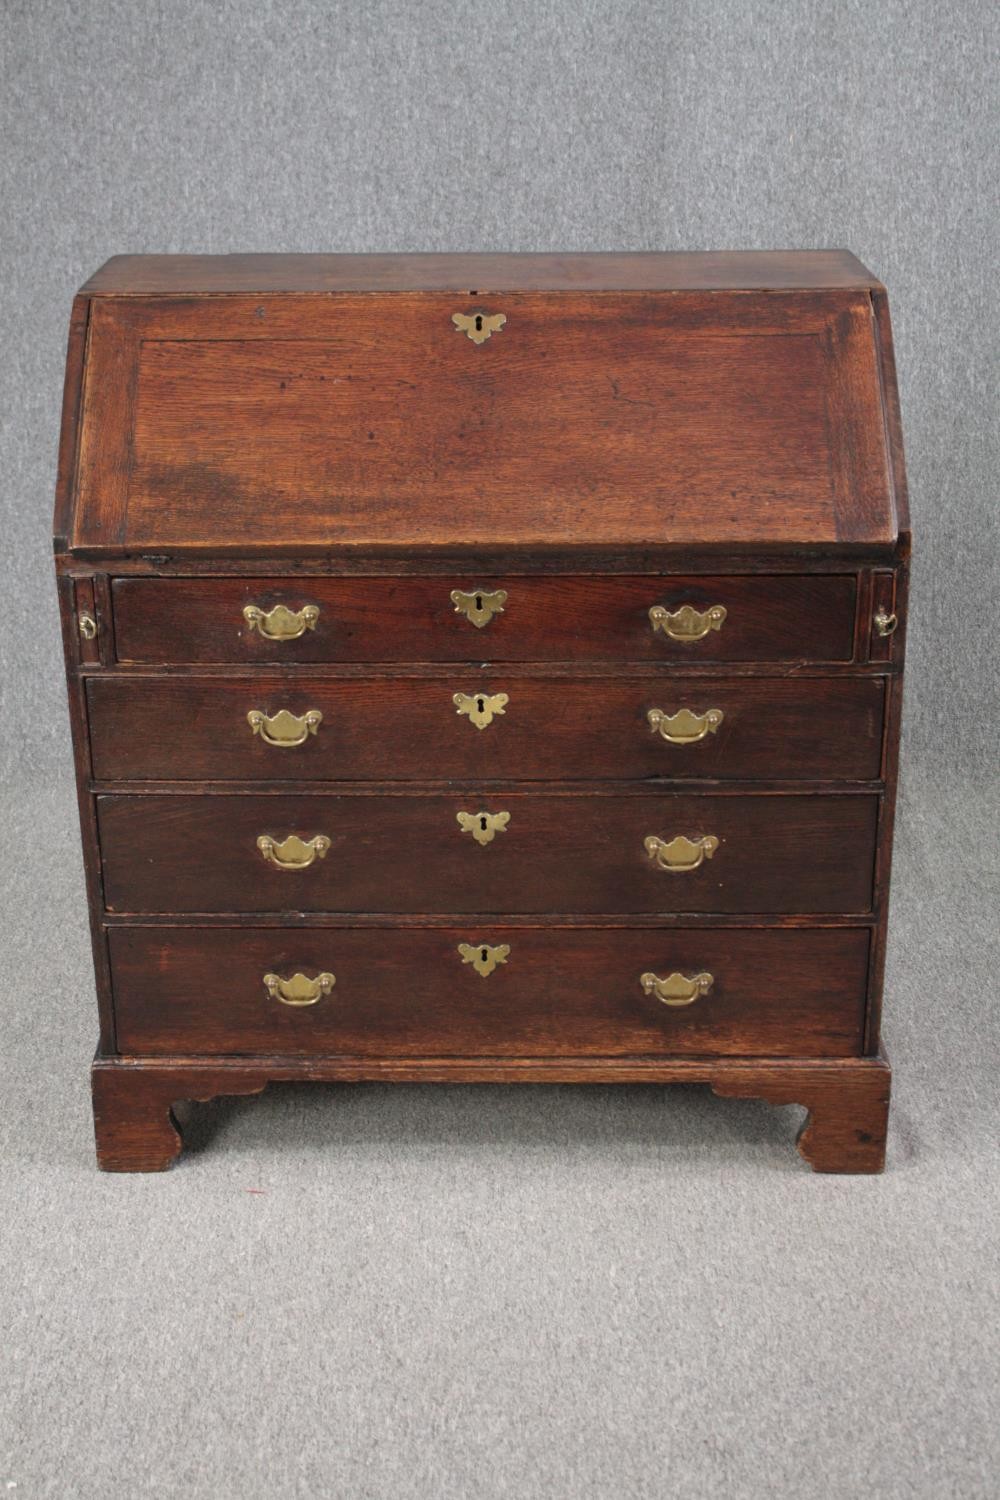 Bureau, Georgian oak with fitted interior. H.101 W.92 D.52cm. (Some wear and tear commensurate